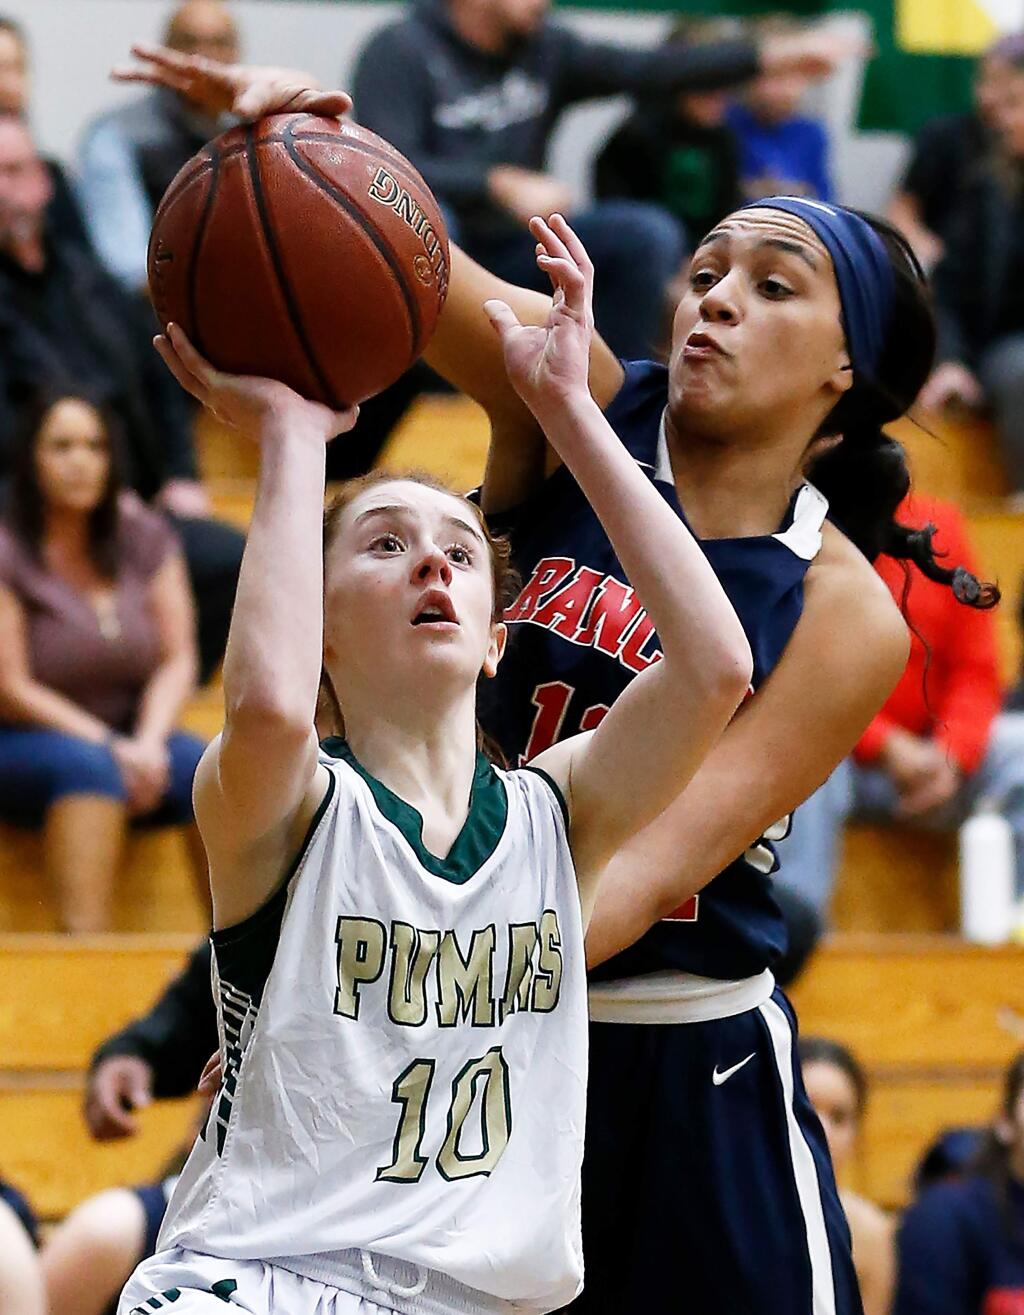 Rancho Cotate's Keyonee Neal, right, blocks a shot by Maria Carrillo's Adrianna Brandt during the first half between Rancho Cotate and Maria Carrillo high schools in Santa Rosa on Tuesday, February 4, 2020. (Alvin Jornada / The Press Democrat)